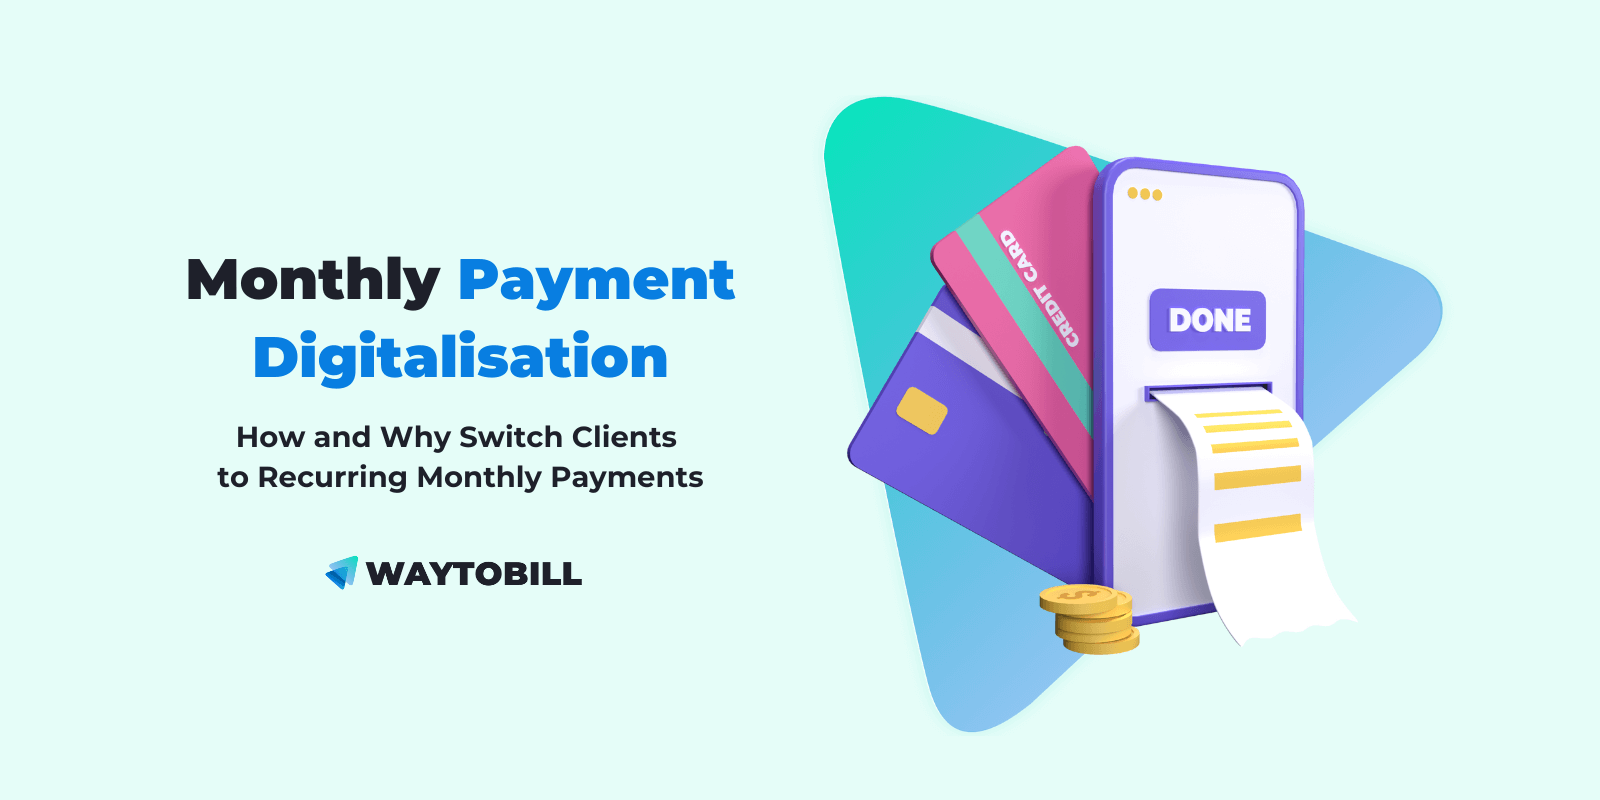 What is Payment Digitalisation & Why Switch to Digital Recurring Payments